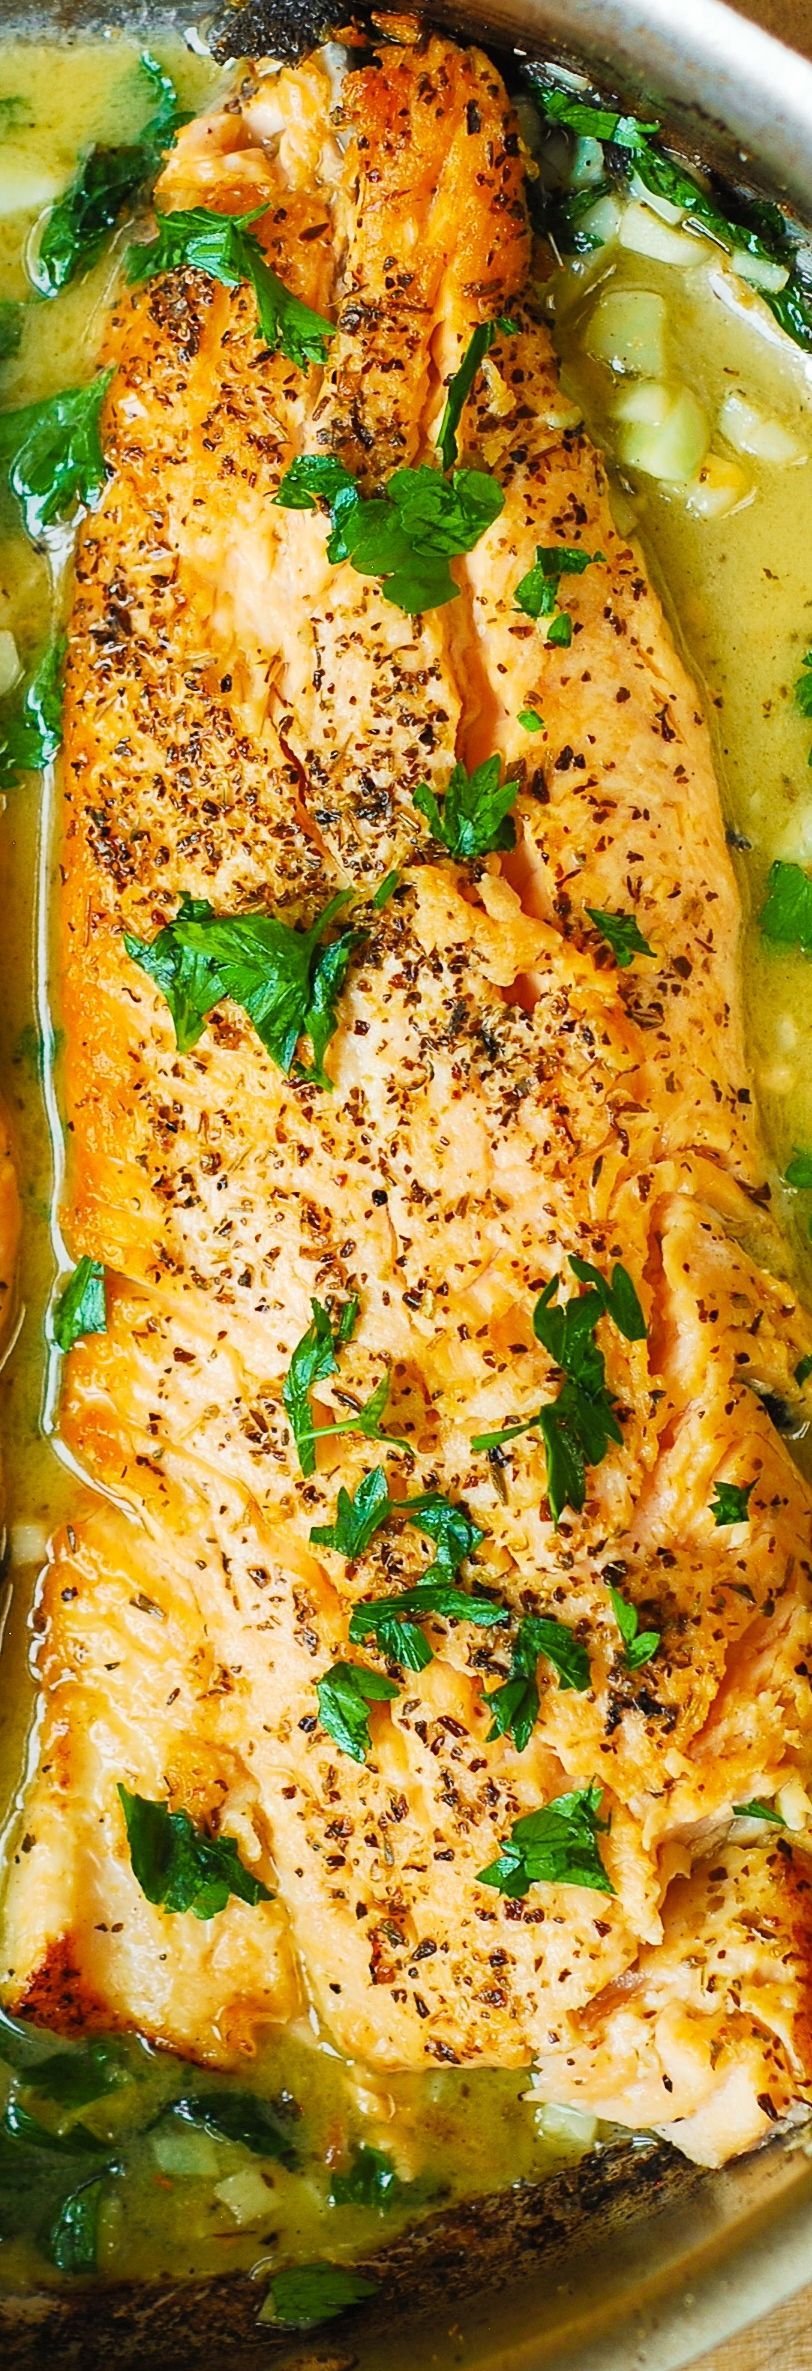 Trout cooked on the stove-top with Garlic Lemon Butter Herb Sauce - 30 minutes recipe. Italian herb seasoning, chopped fresh parsley and garlic - YUM! -   24 fish recipes trout
 ideas